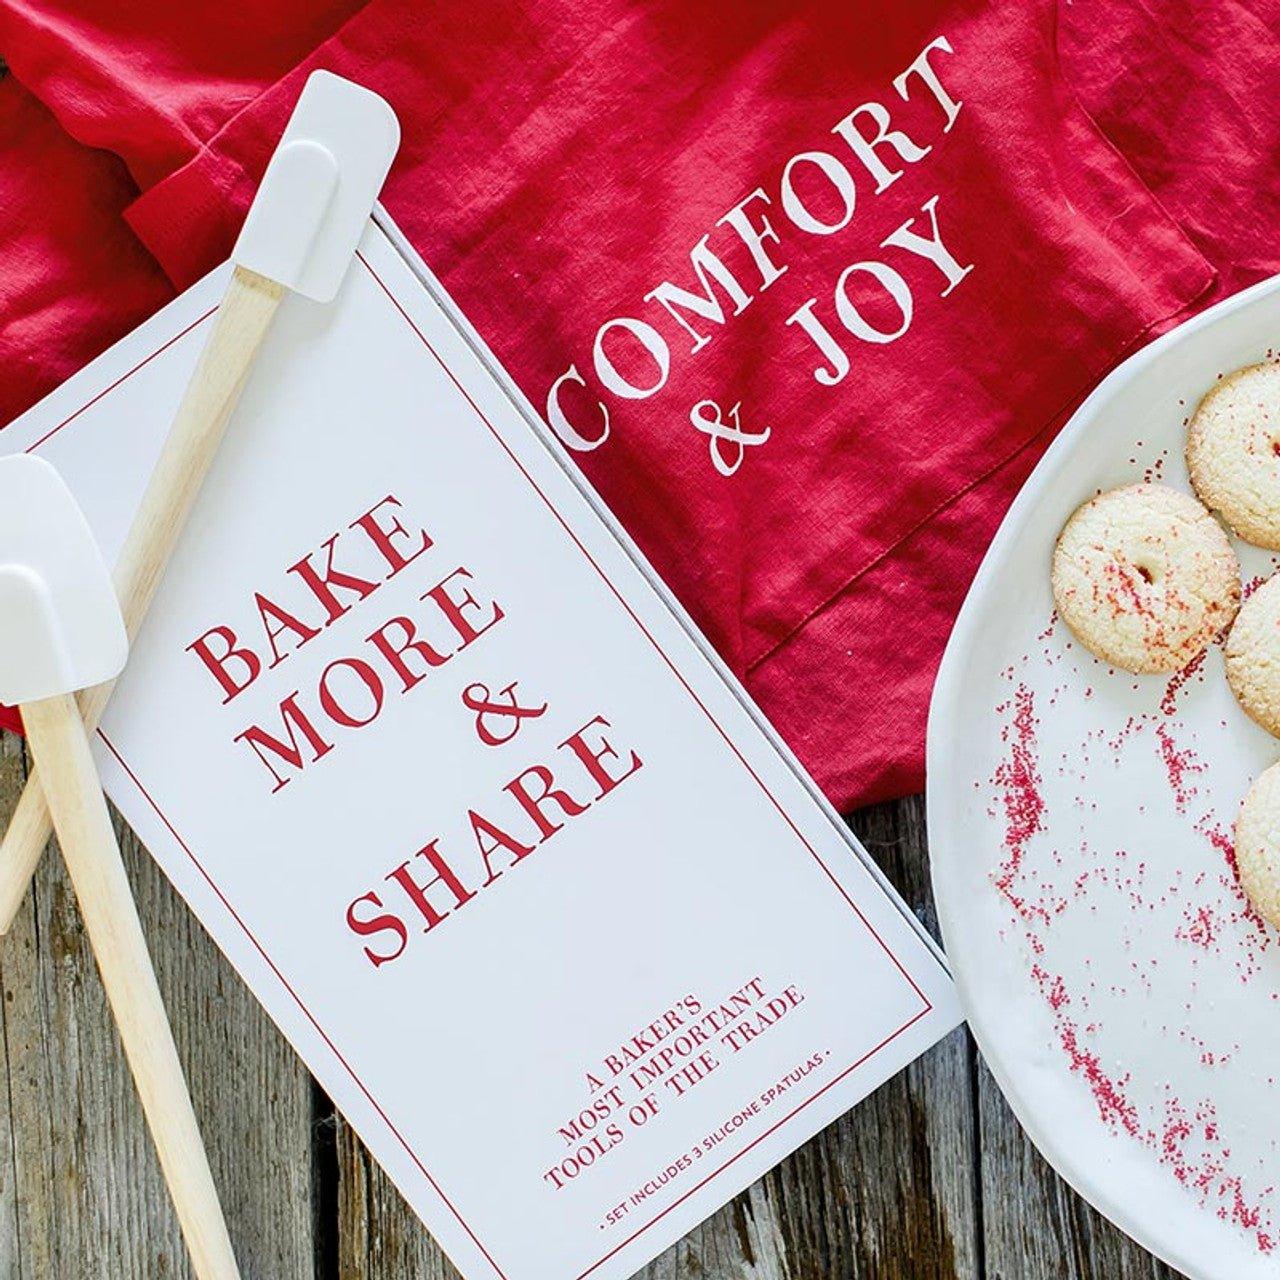 Bake More & Share Baking Tools Book Style Box | 3 Piece Spatulas | Giftable by The Bullish Store - Vysn